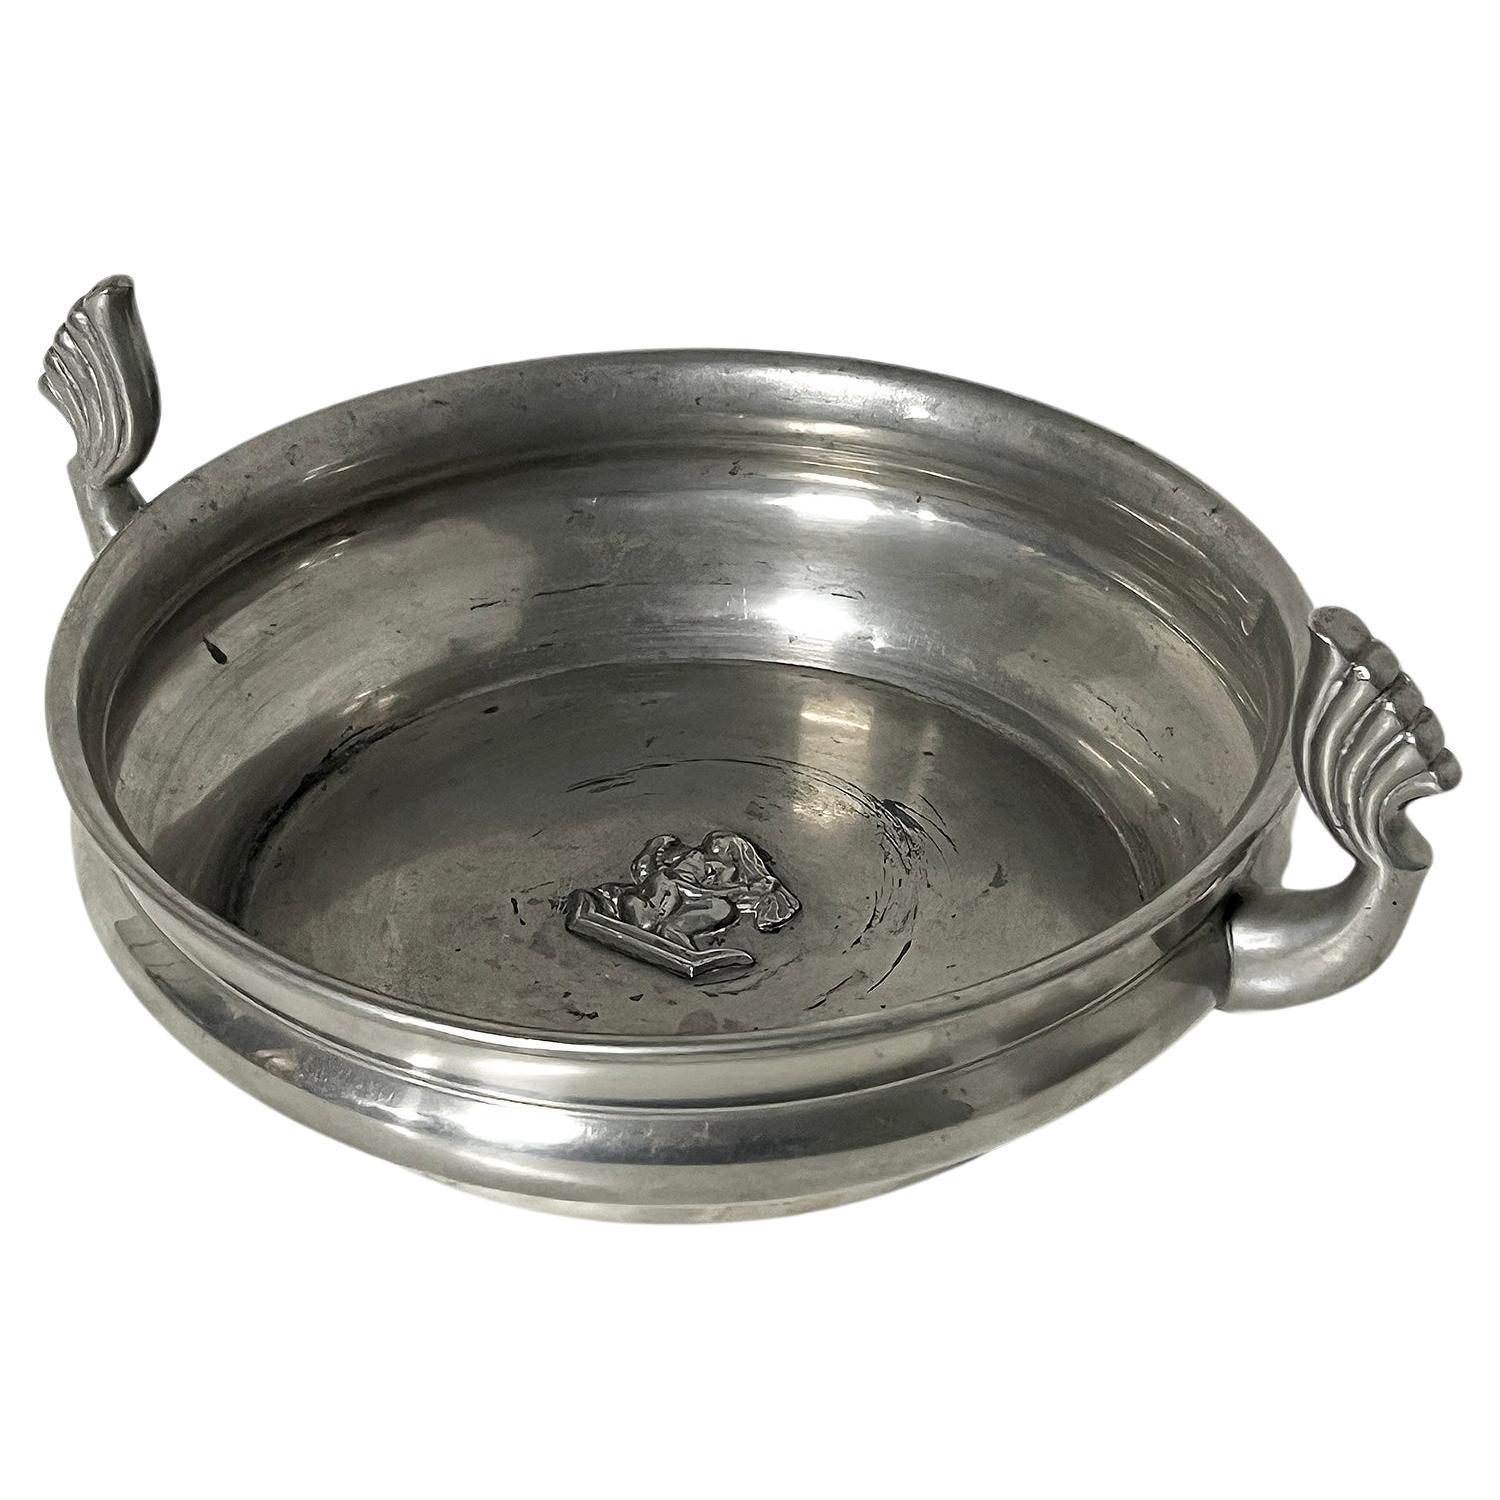 Swedish Modern Bowl in Pewter by CG Hallberg, 1930 For Sale